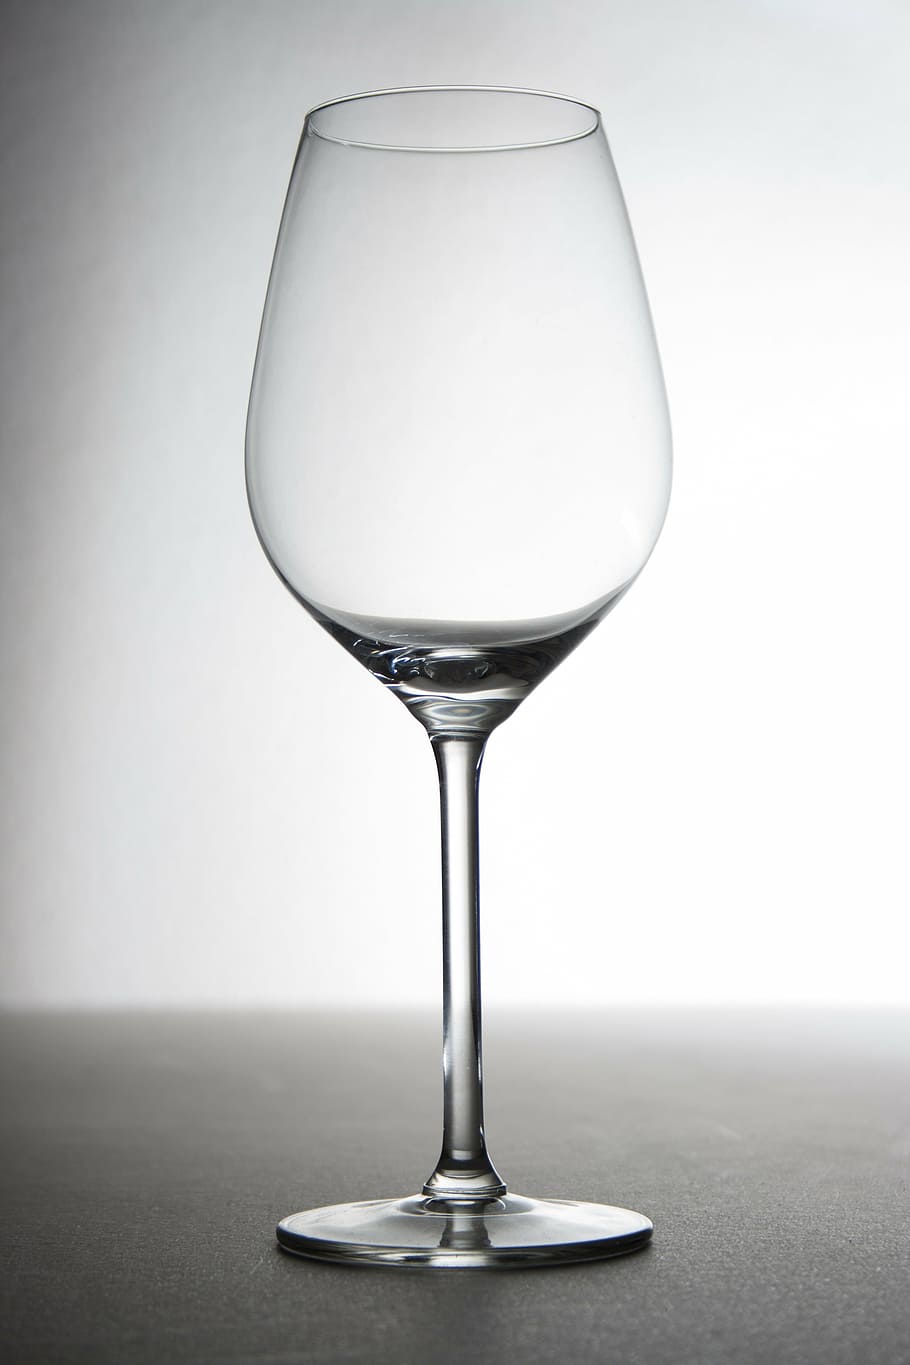 shallow, focus photography, wine glass, wine, glass, chic, drink, drinking, pande, empty